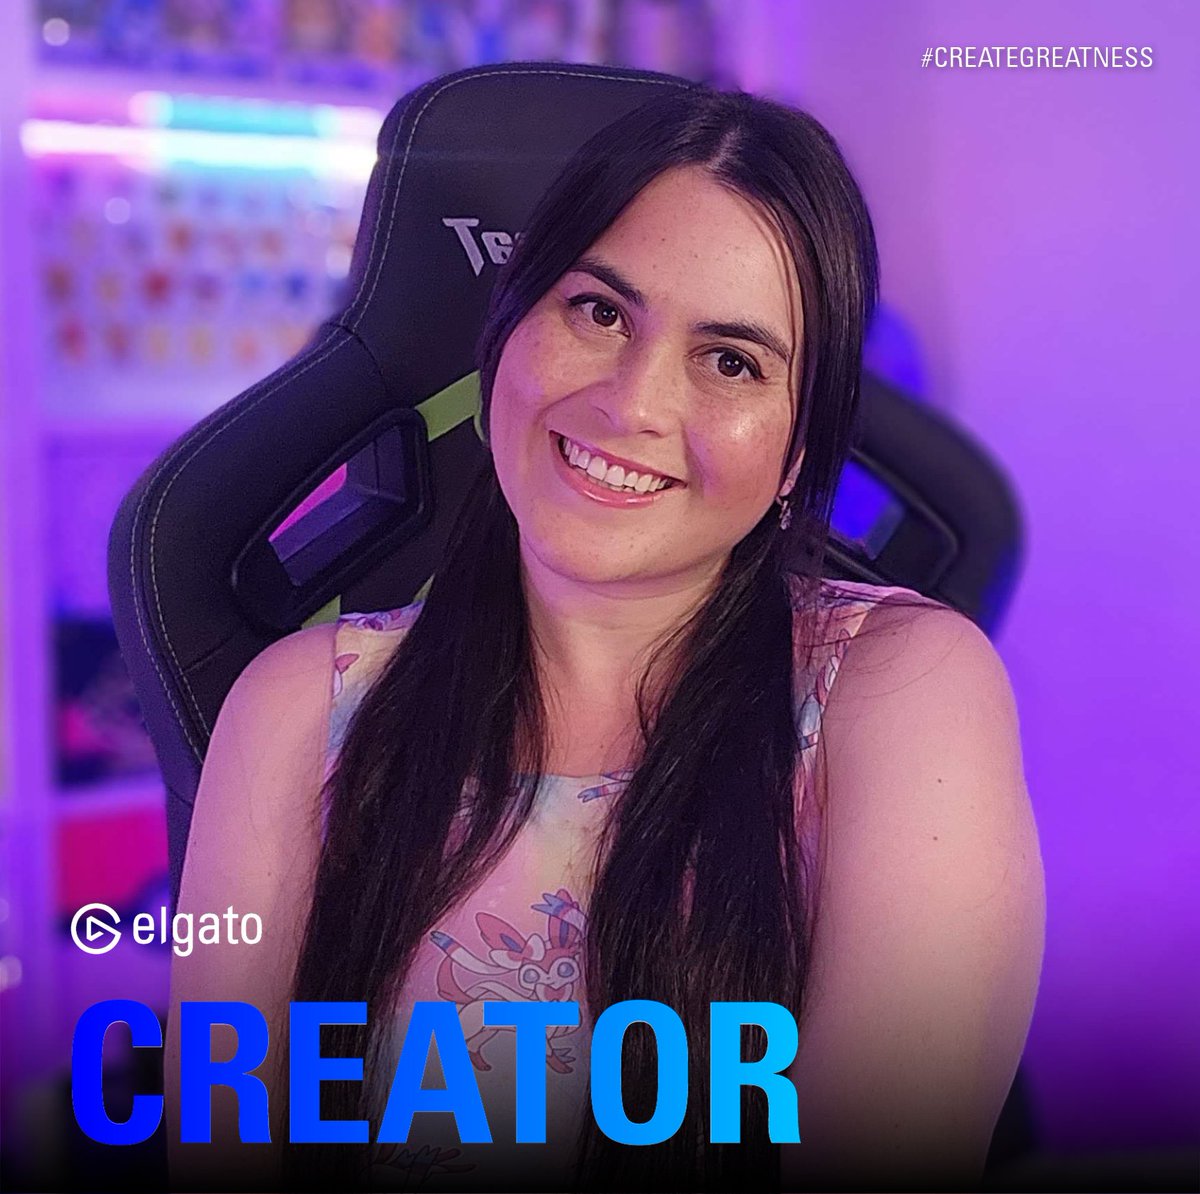 Absolutely thrilled to announce that I'm an #Elgatoambassador! 💙

Super thankful to receive the opportunity to be a part of the @elgato fam & #creategreatness 🫡

A discount code for you to use coming soon 👀
But feel free to check out their products using my link below 👇